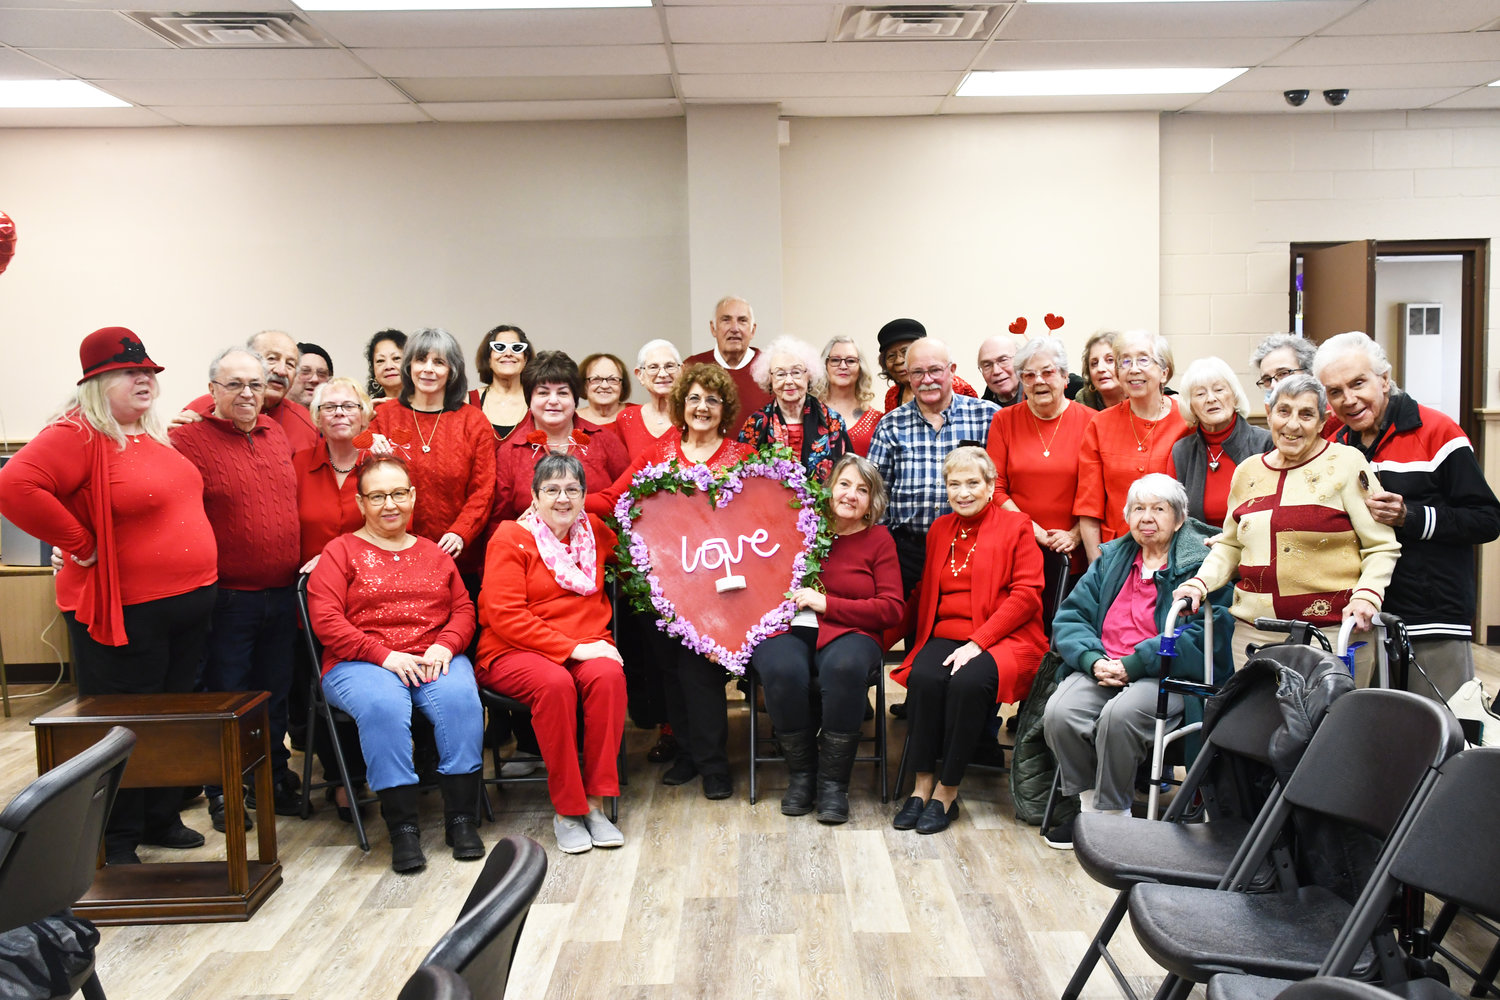 All attendees gather at the South Fallsburg Seniors Valentine’s Day celebration.